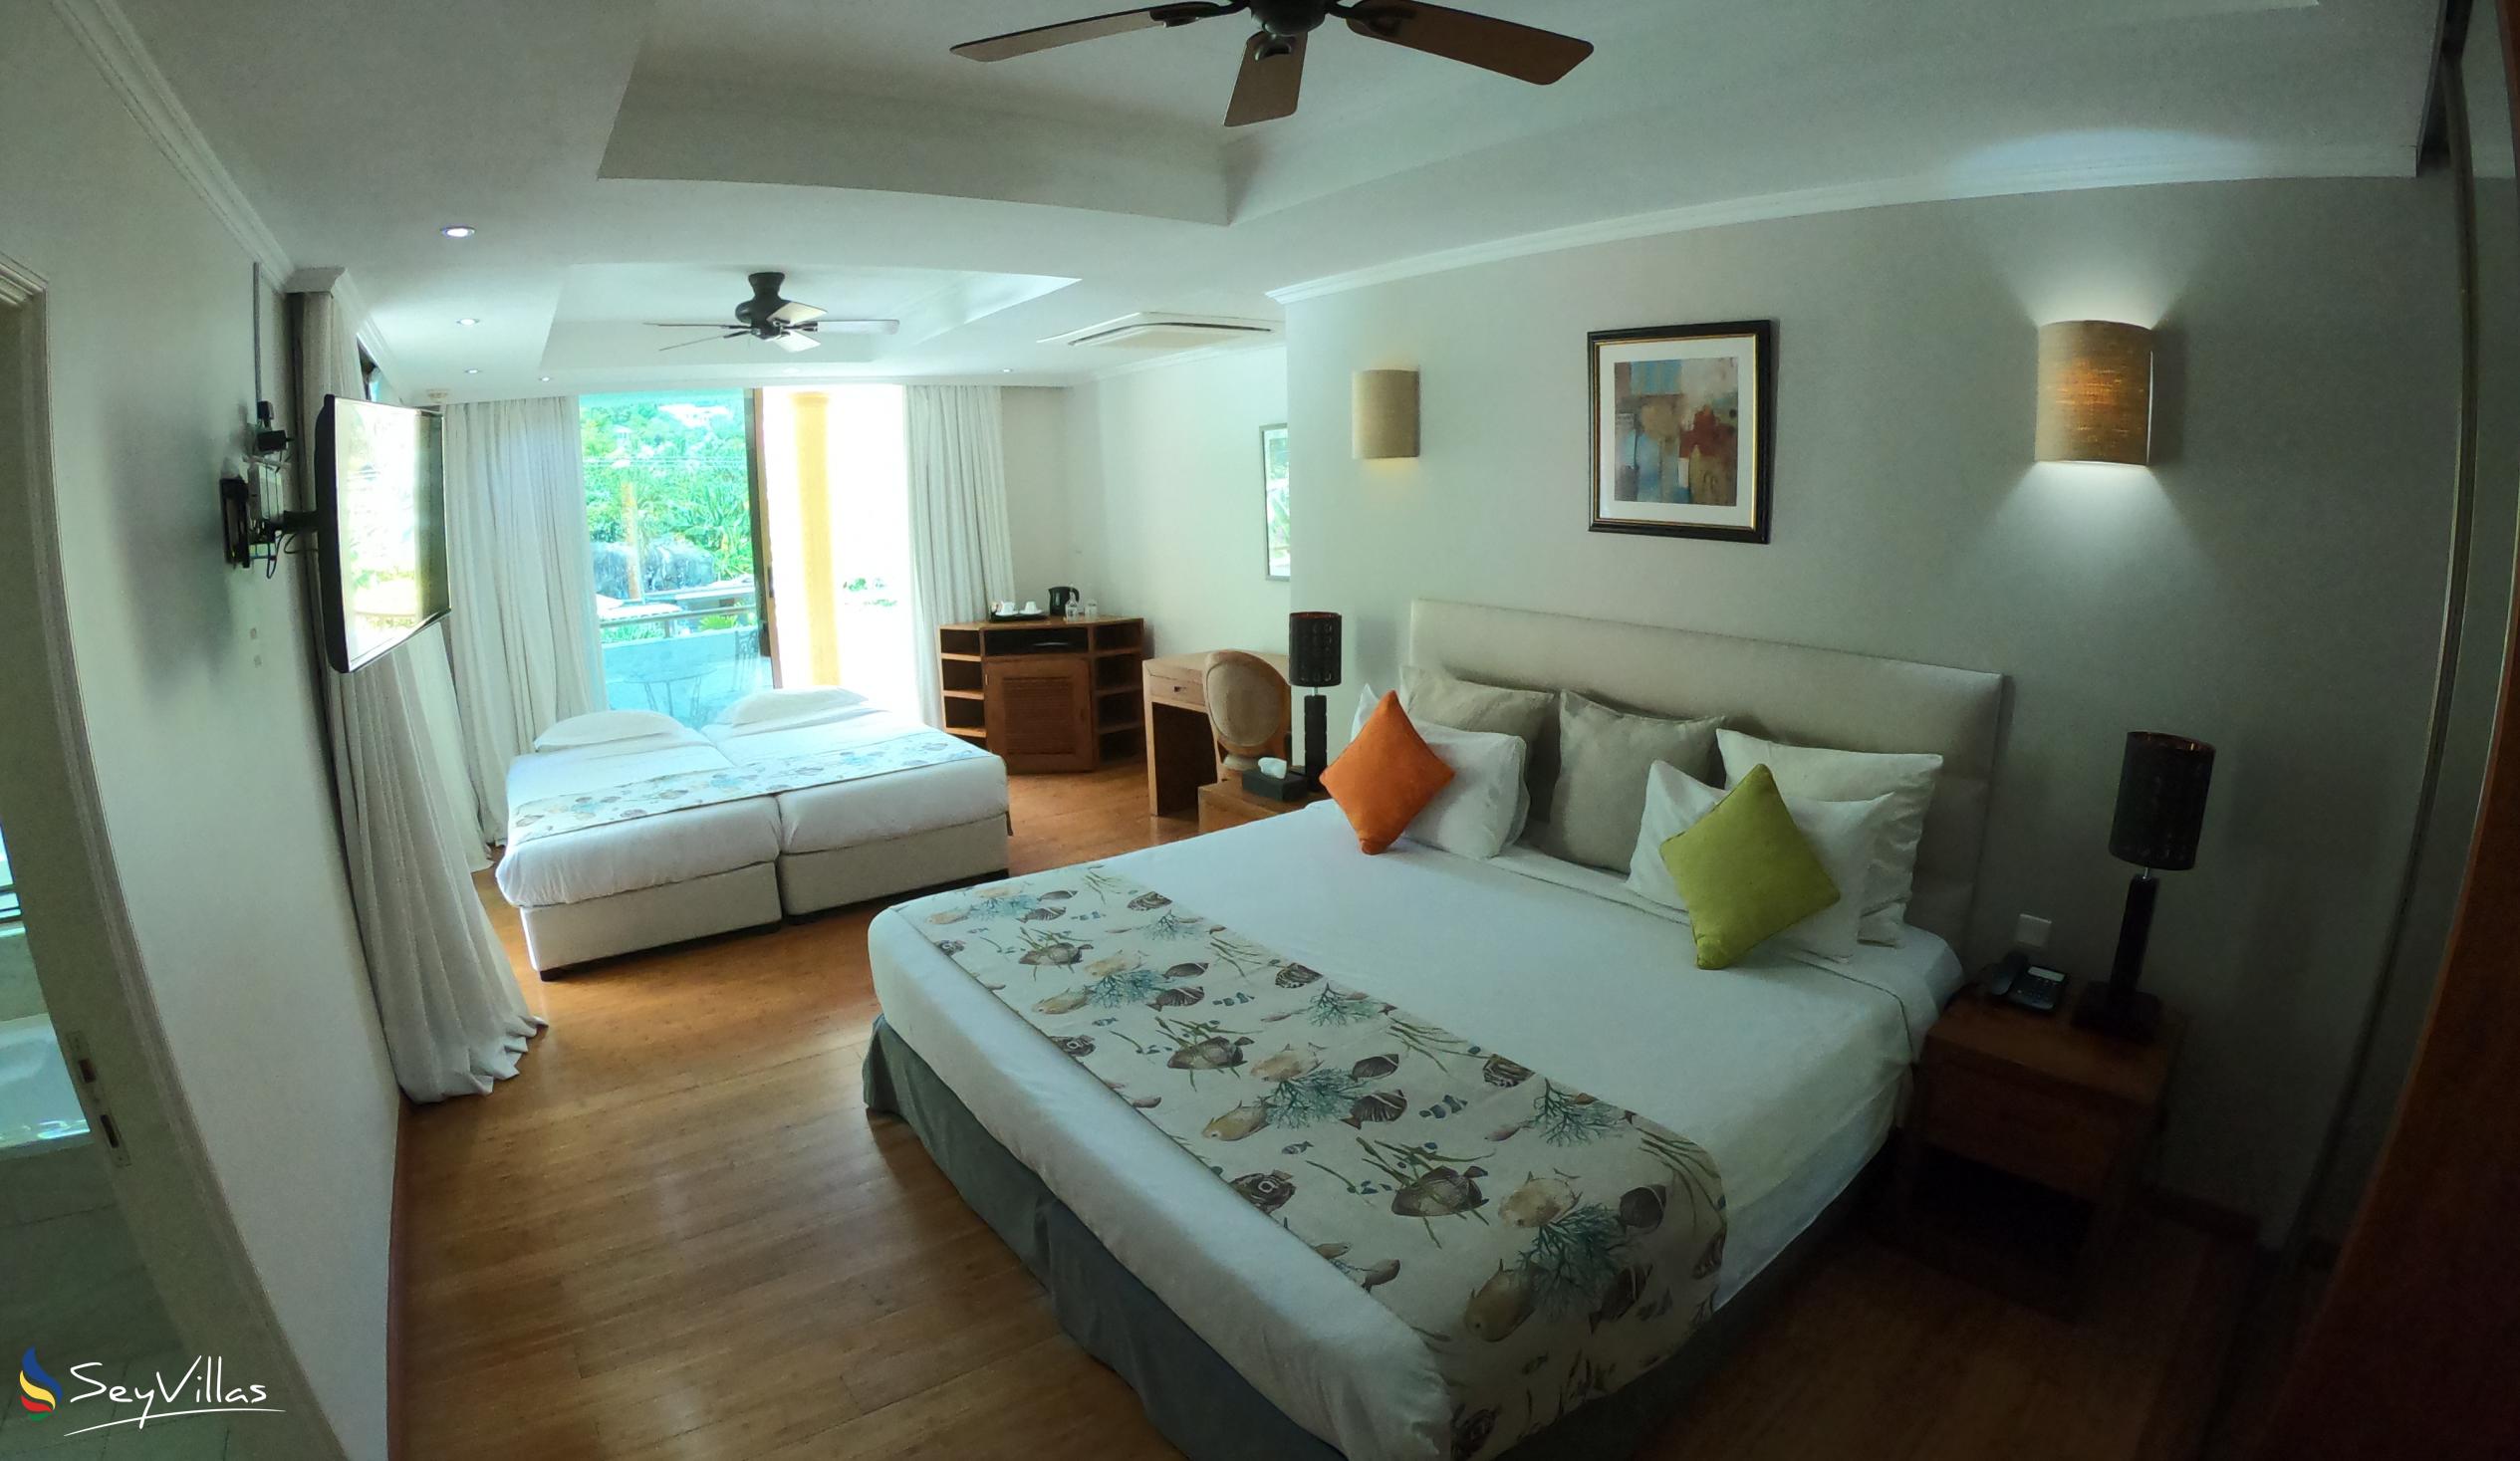 Photo 78: Crown Beach Hotel - Family Room with Mountain View - Mahé (Seychelles)